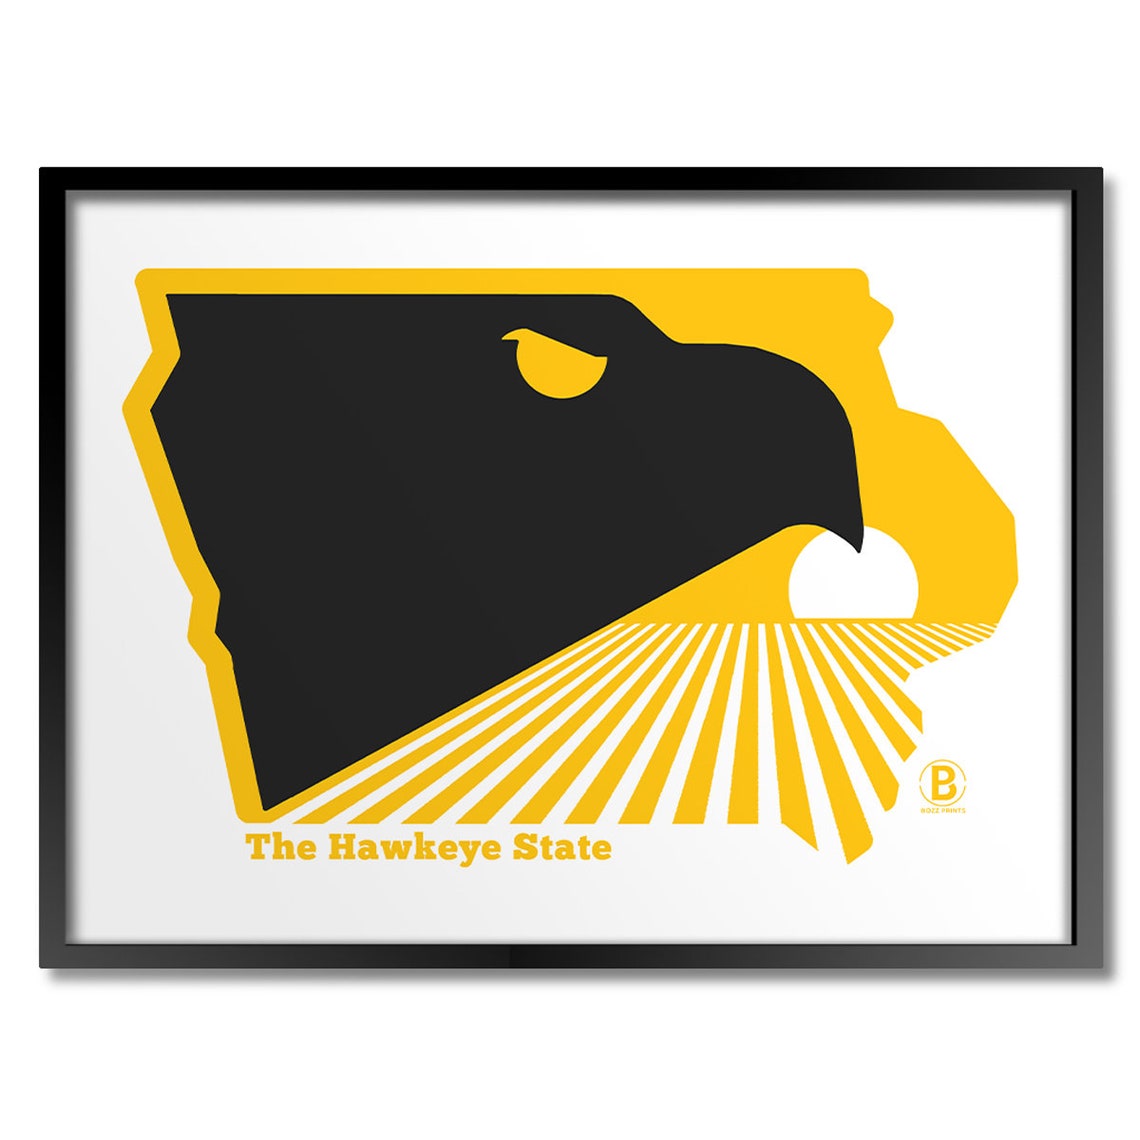 Collection 101+ Images which u.s. state is known as “the hawkeye state”? Full HD, 2k, 4k